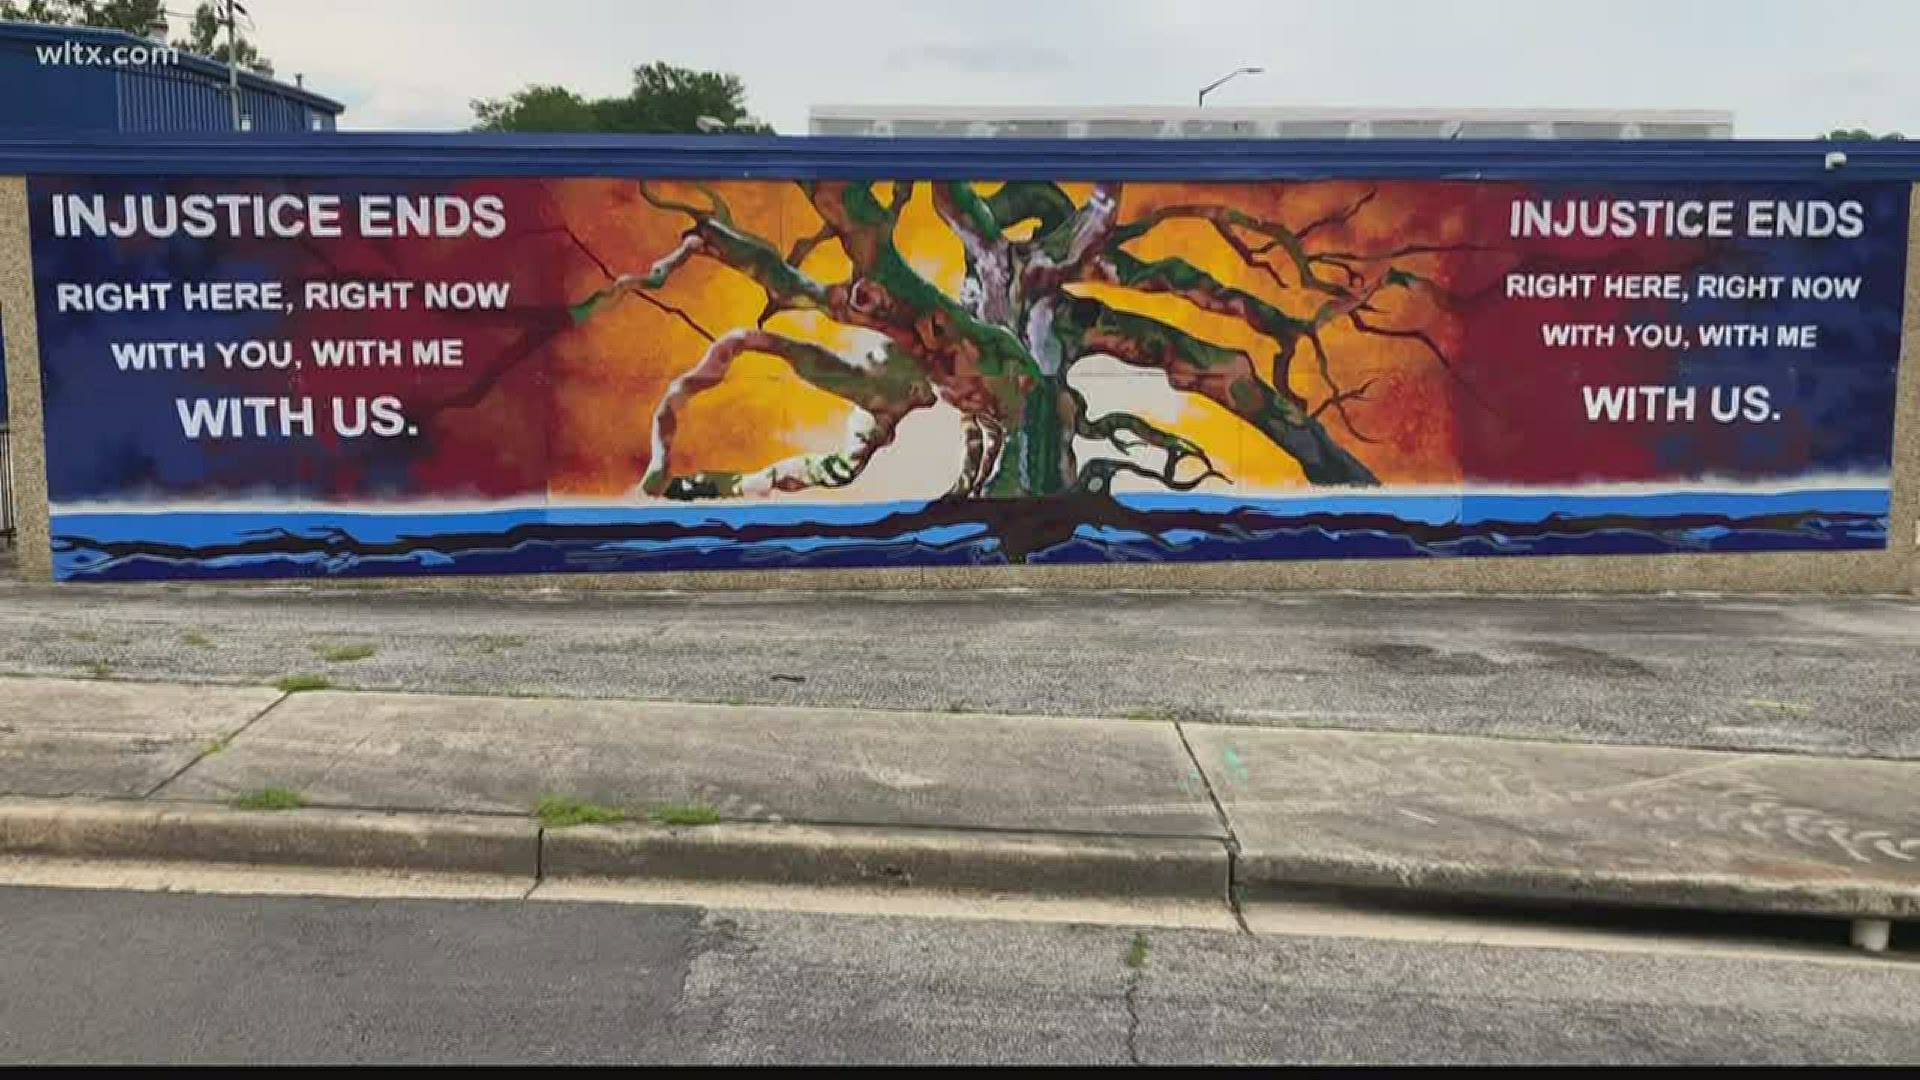 Amid the unrest in our country, one community leader is hoping to spread a message of unity through a community mural.